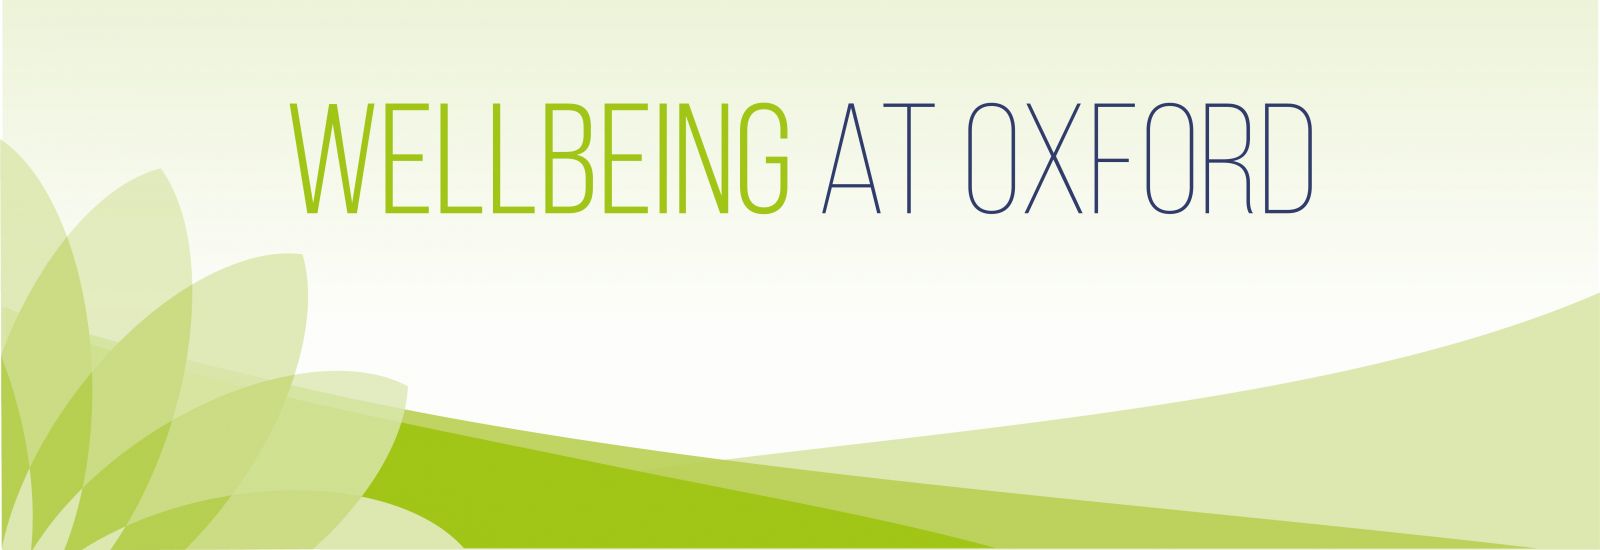 Wellbeing at Oxford logo